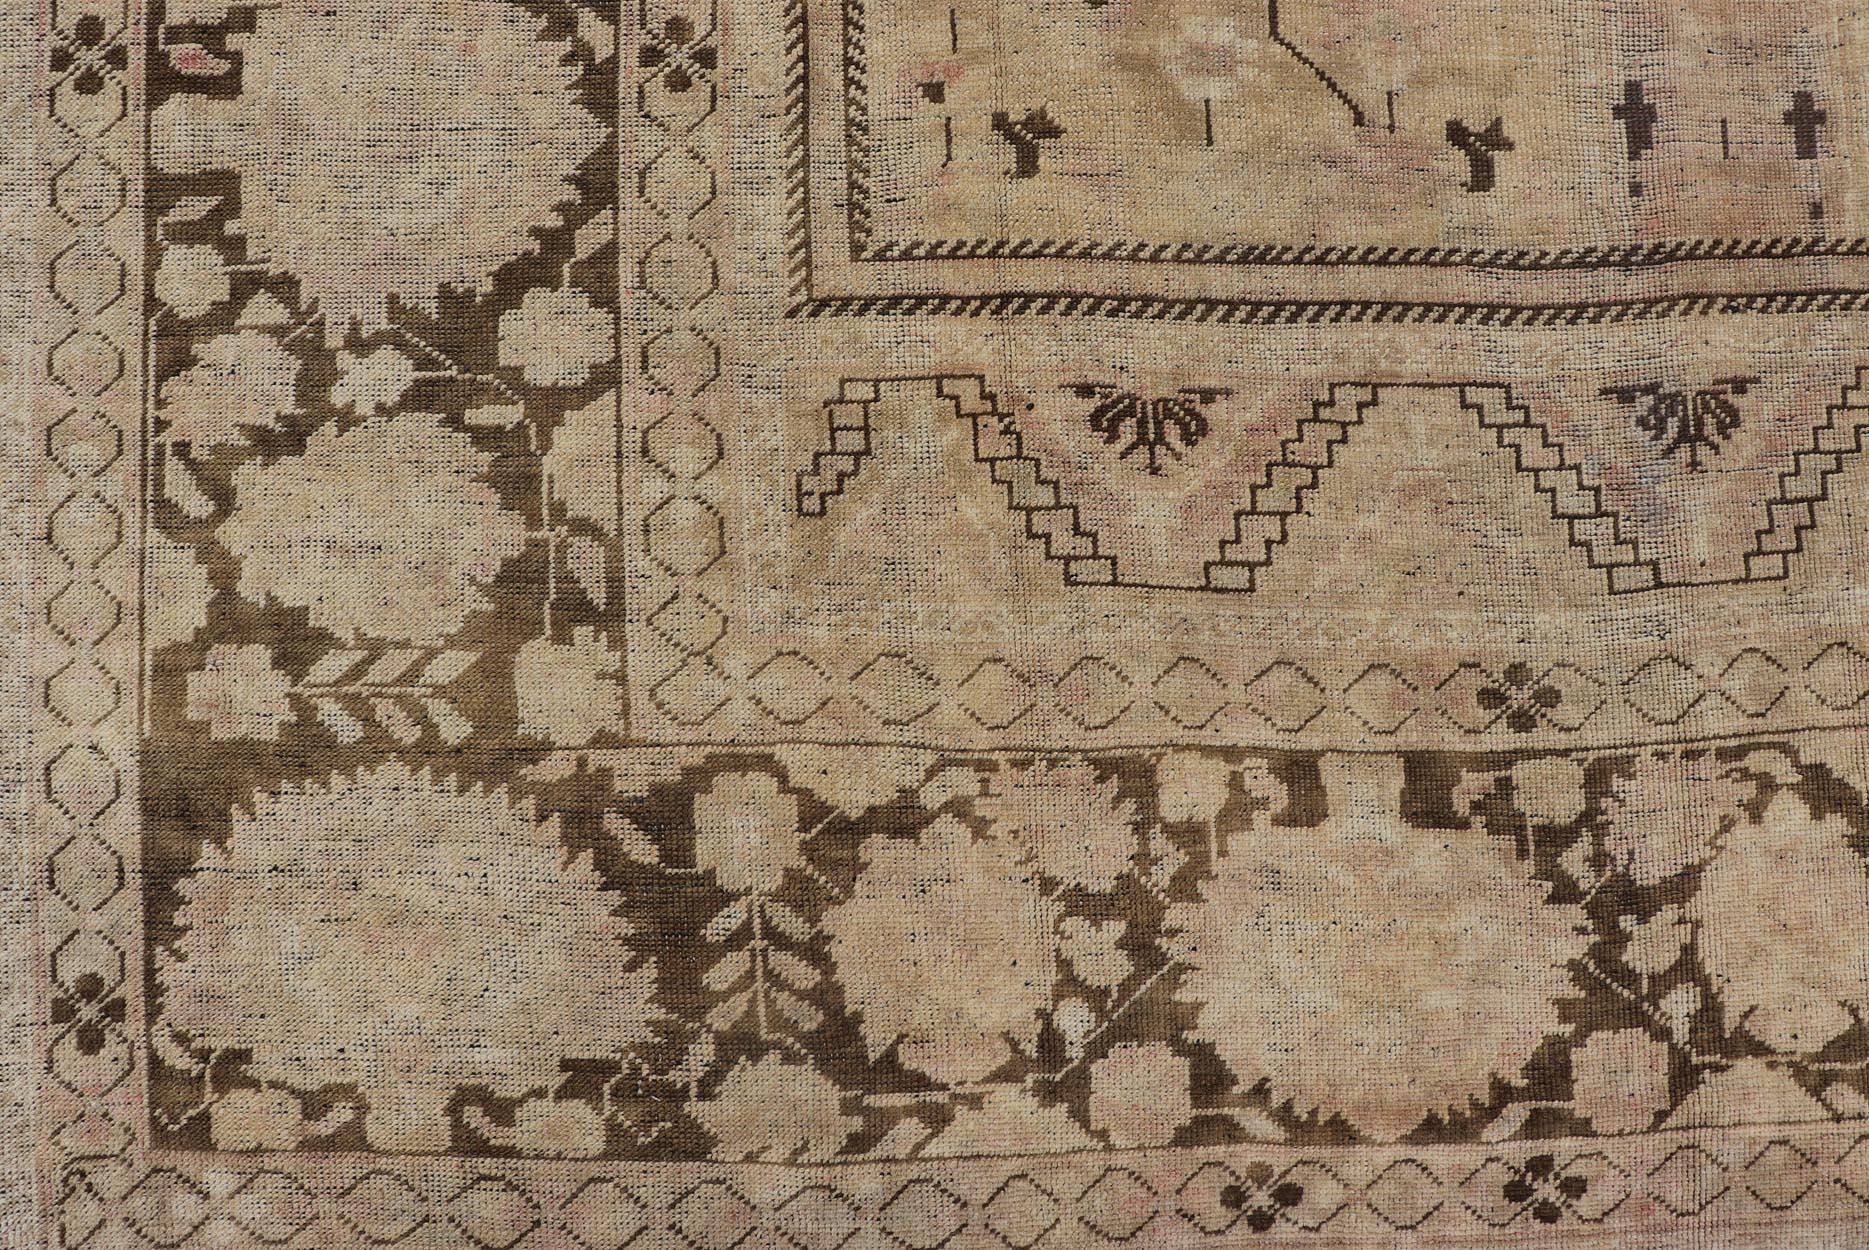 Vintage Oushak Rug with Muted Neutral Colors in Tan, Beige, Taupe, Gray & Brown For Sale 7